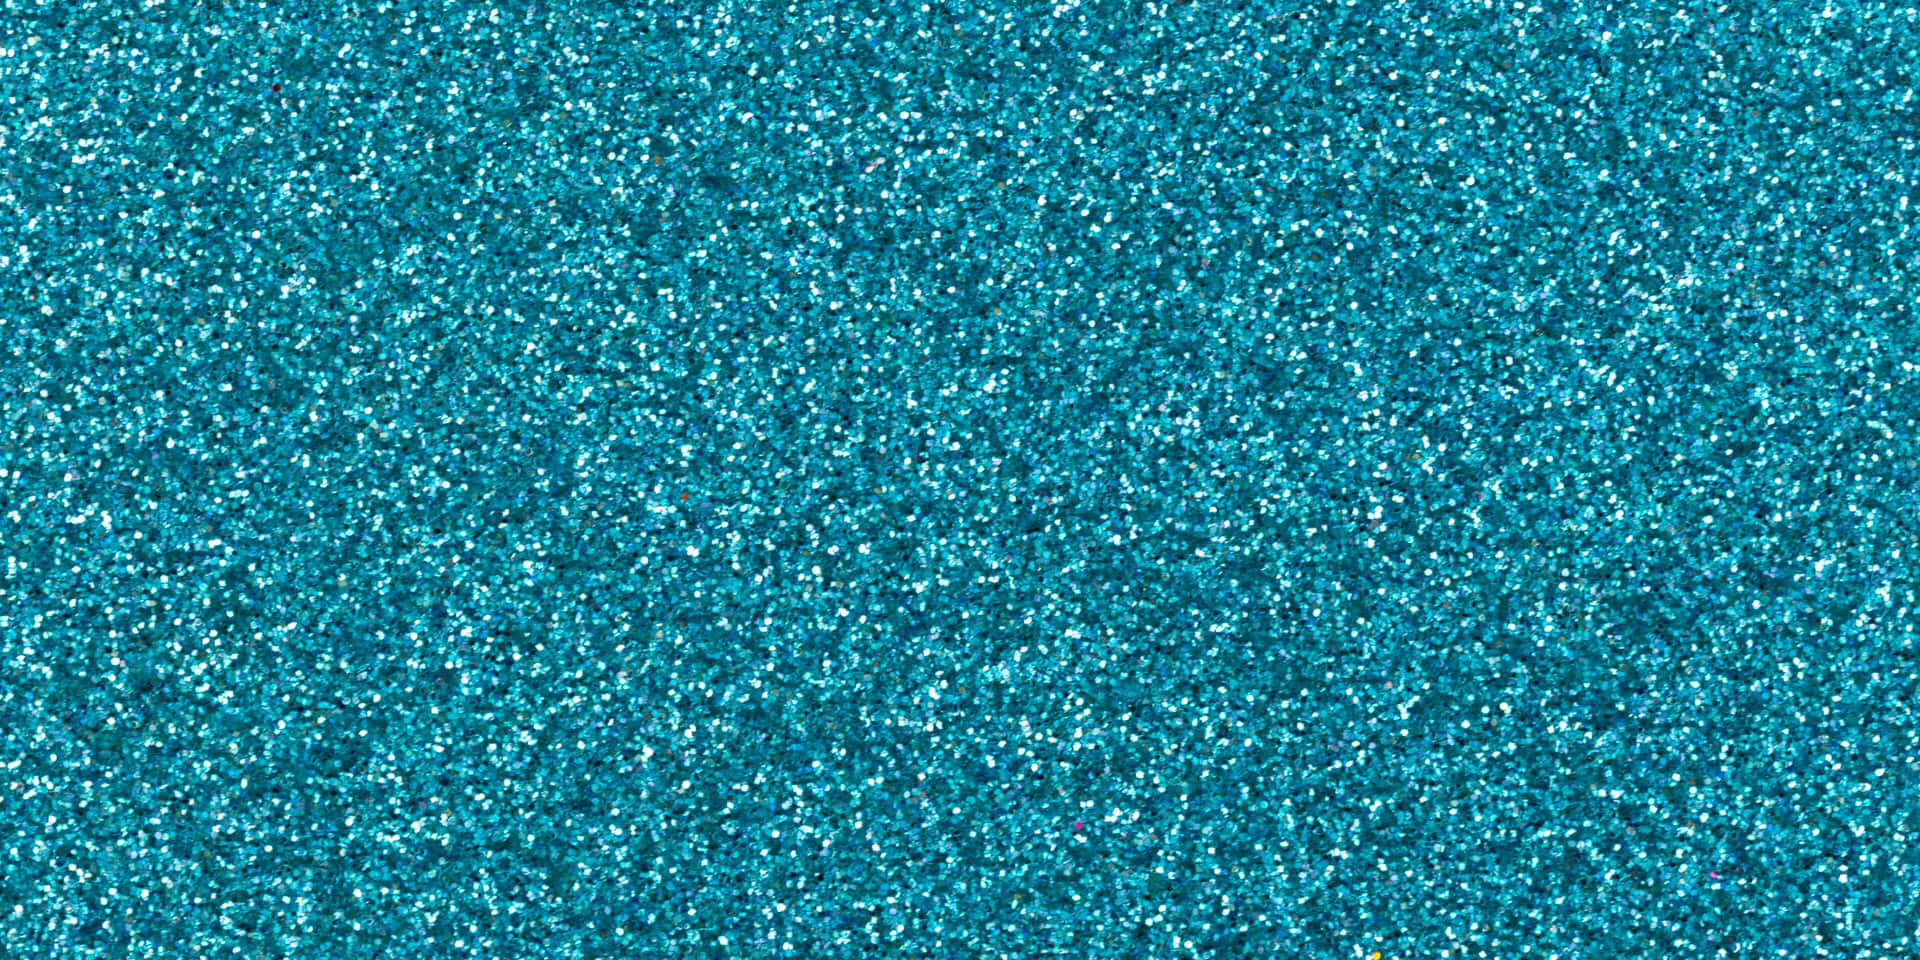 "Bring out your sparkle with this teal glitter background"!